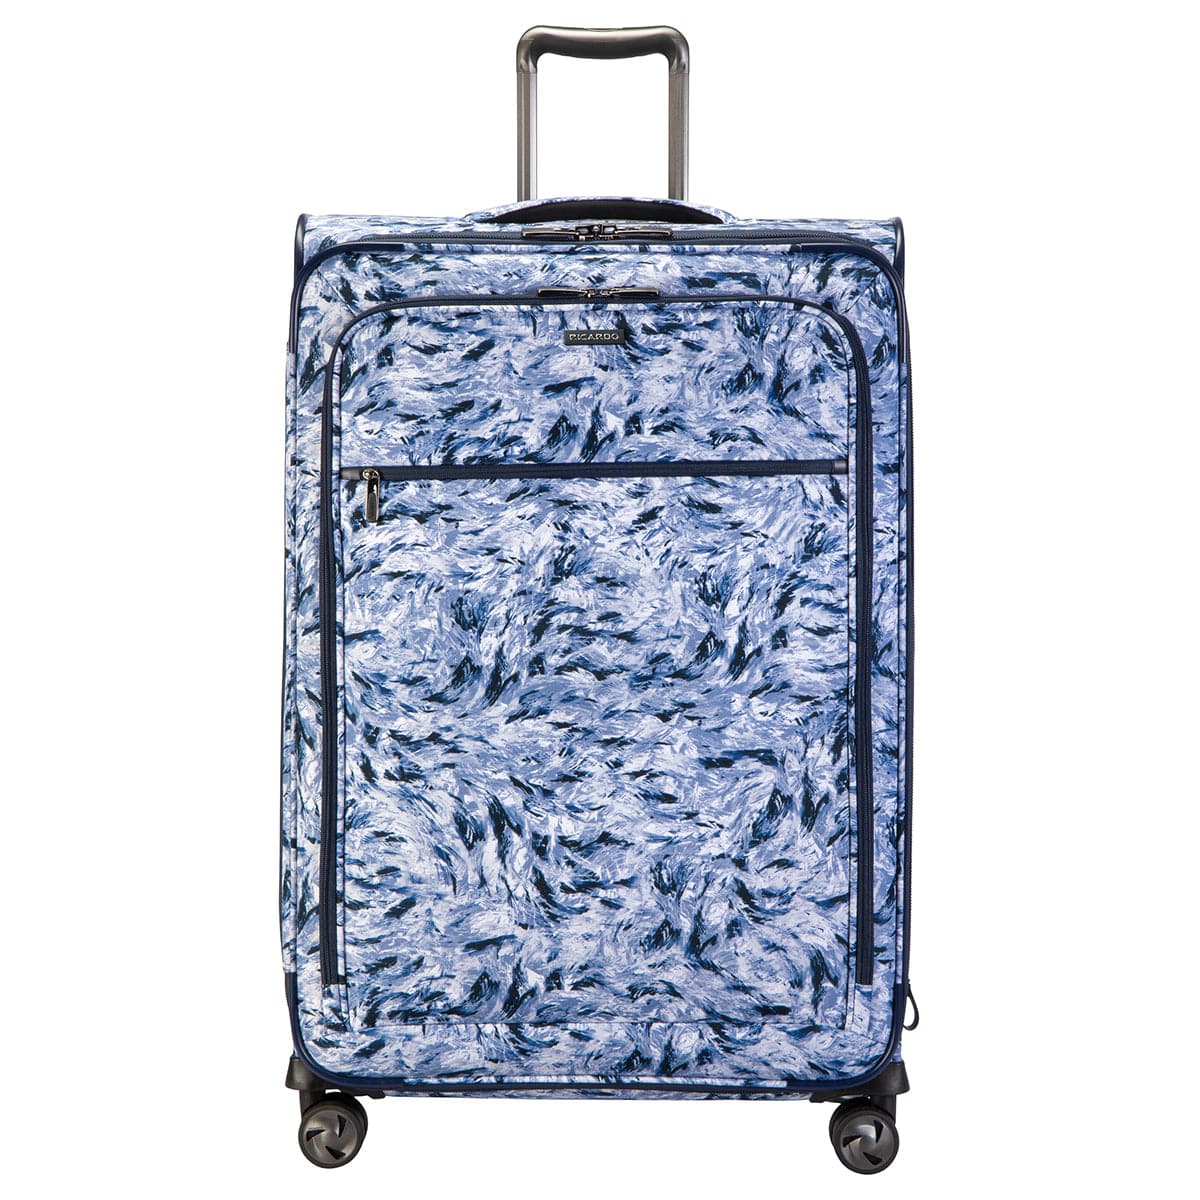 Ricardo Beverly Hills Seahaven 2.0 Large Check-In Luggage